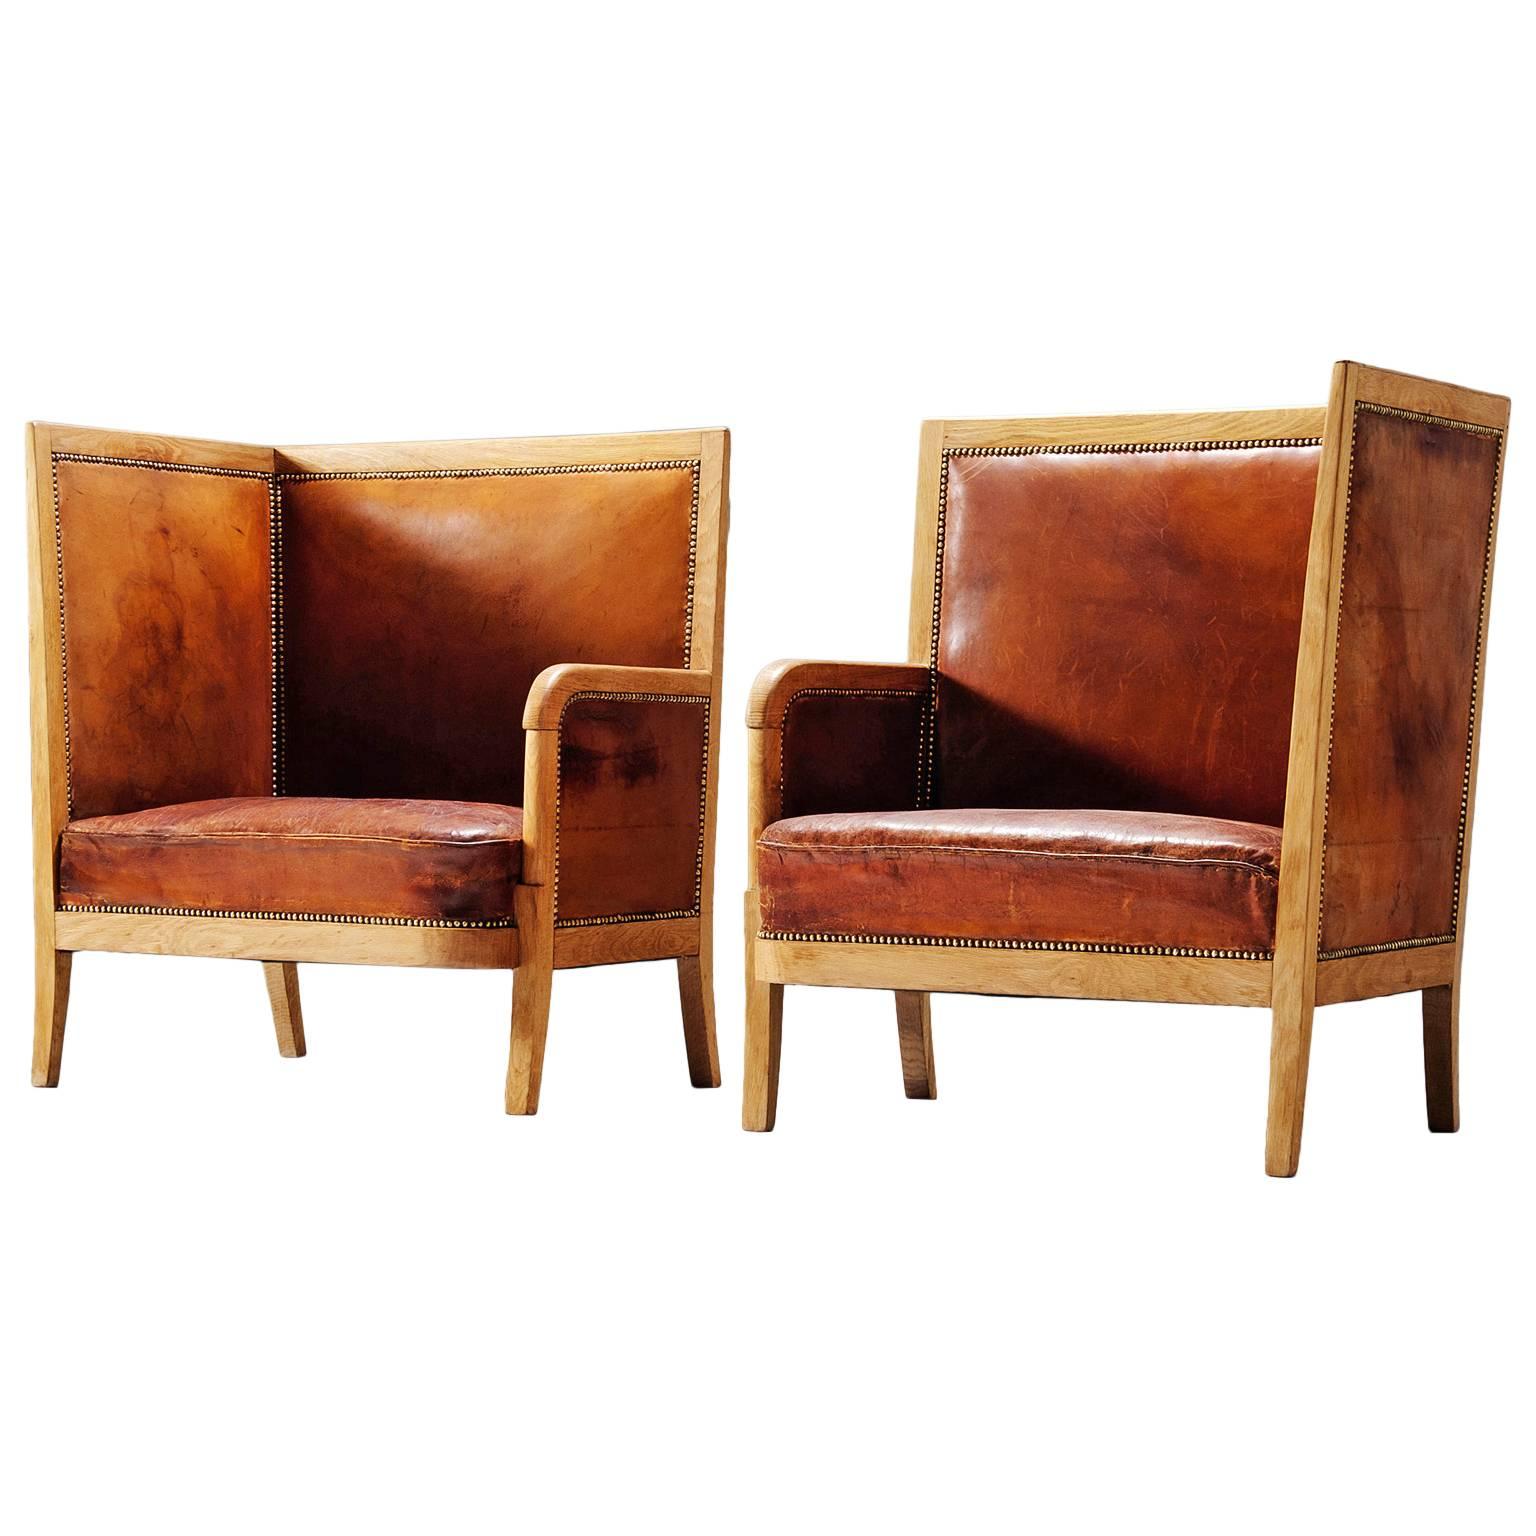 Pair of High Back Chairs in Cognac Leather